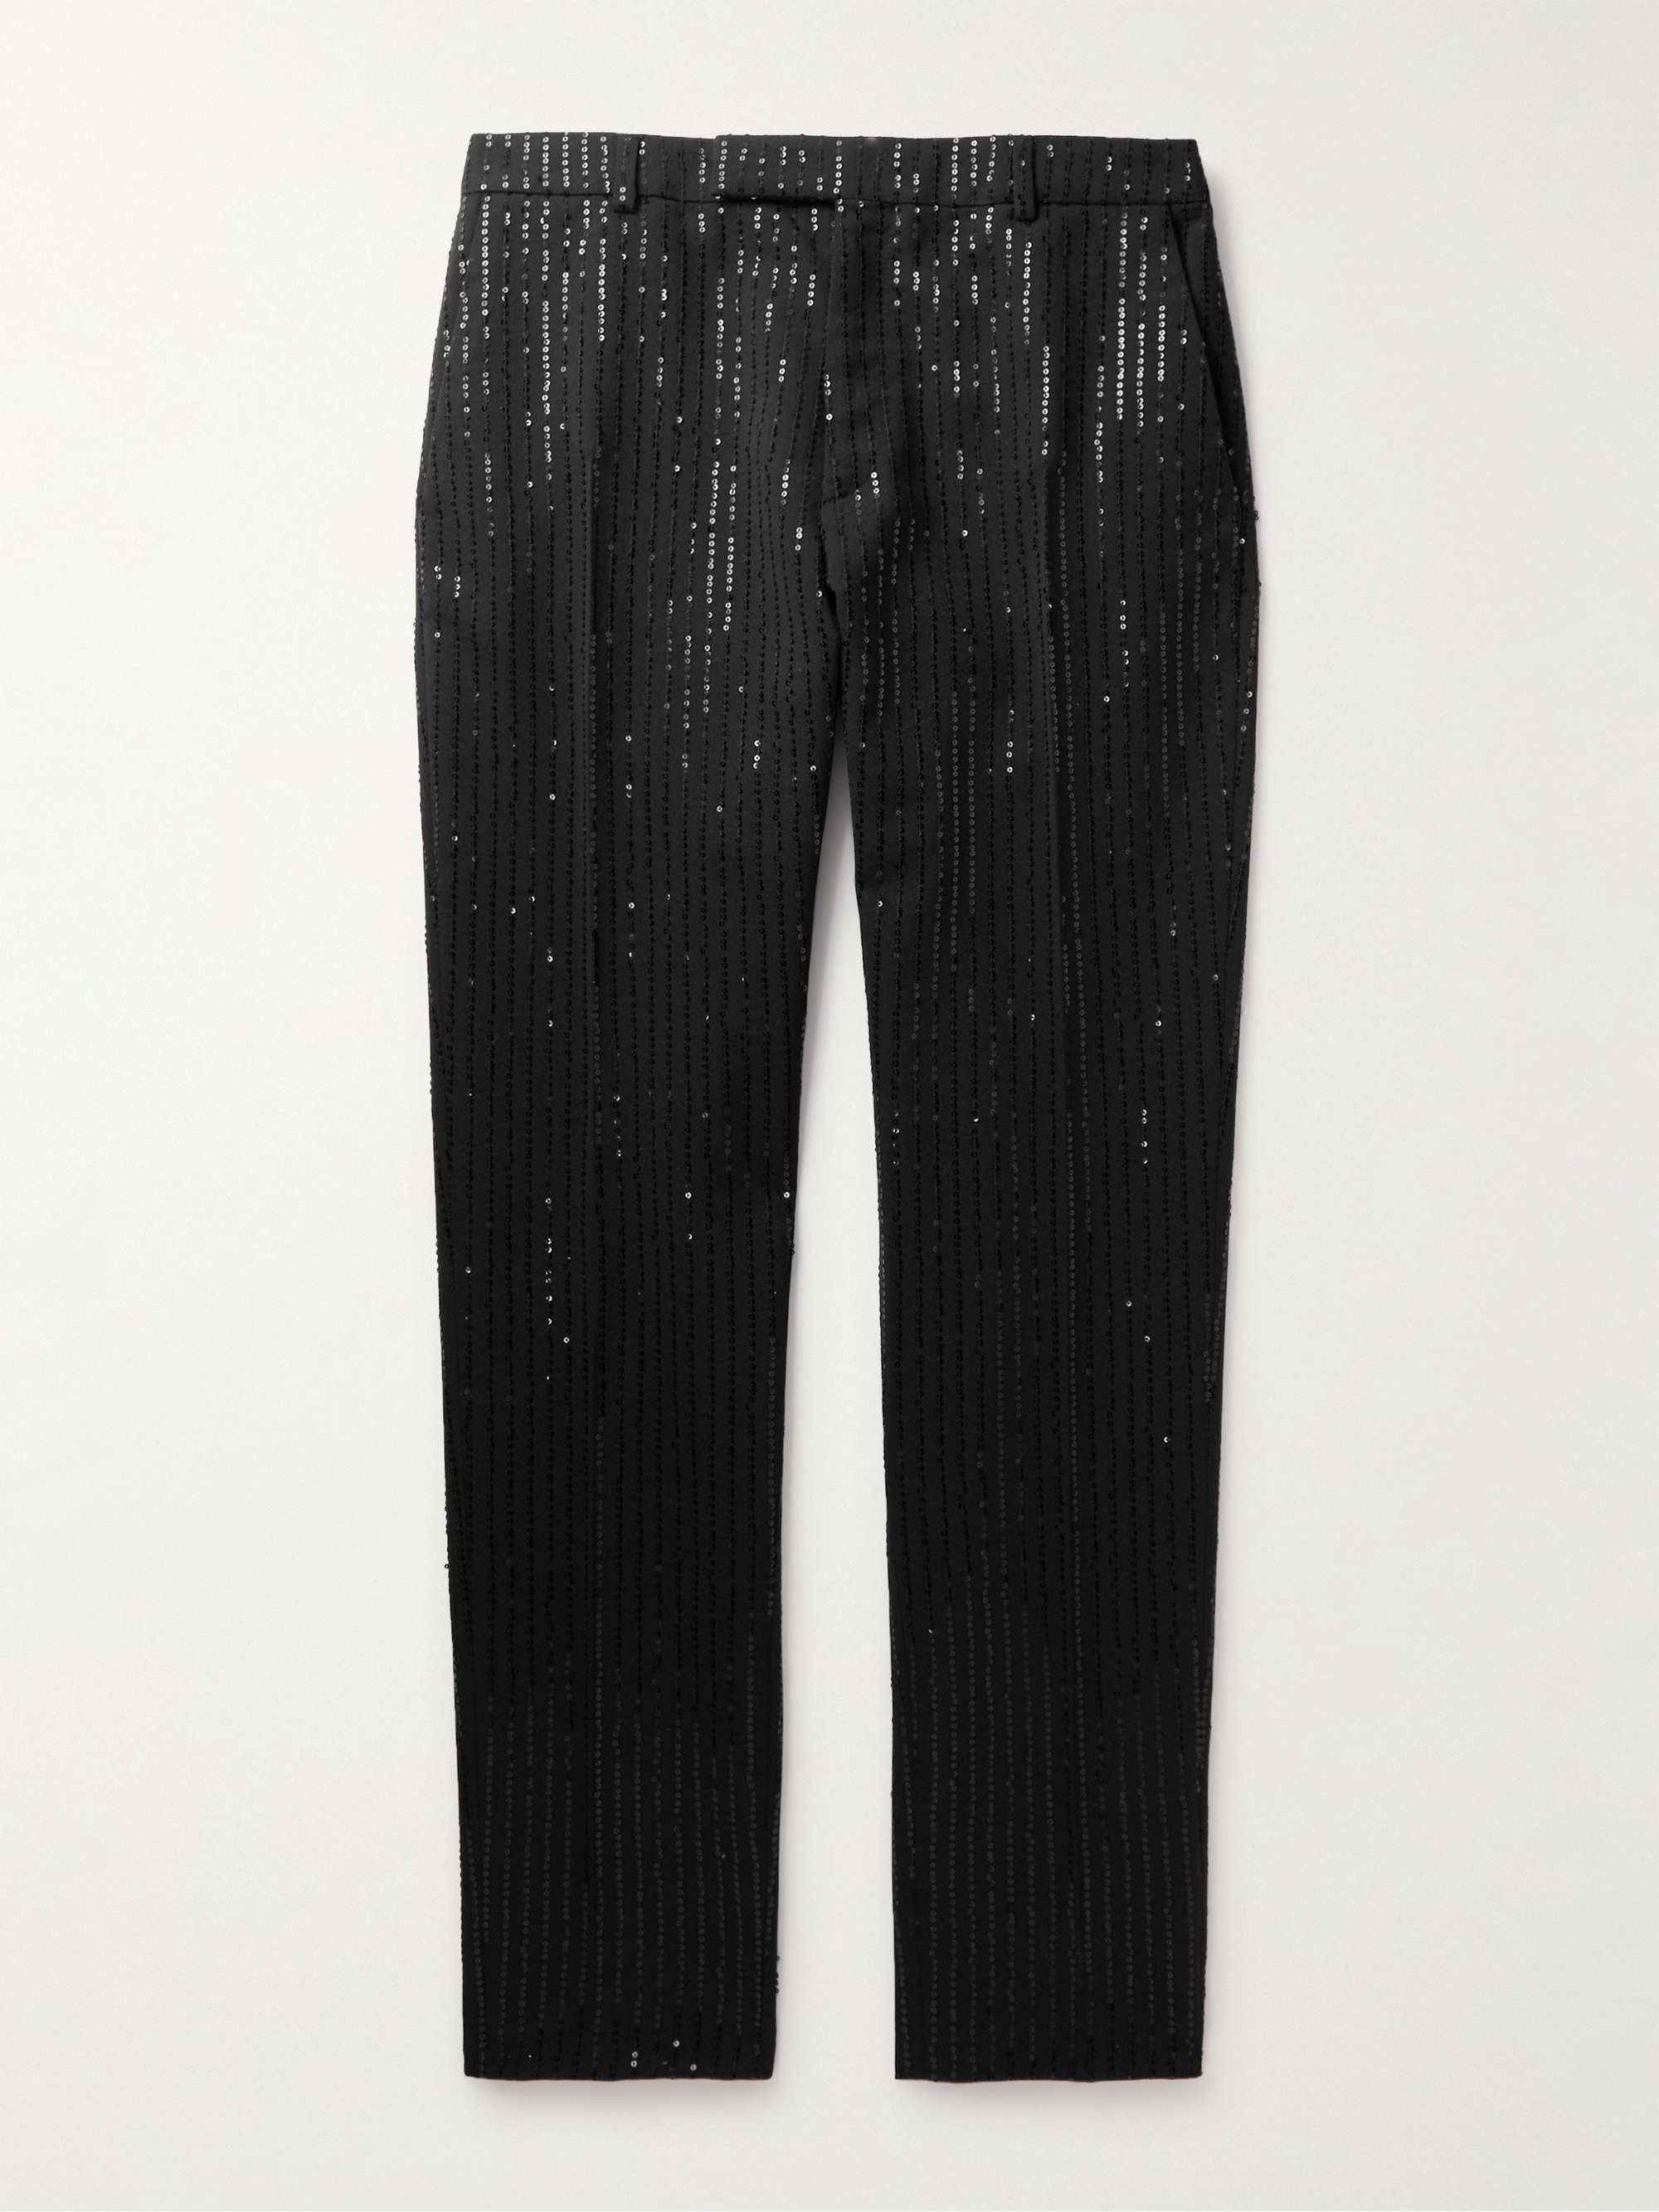 CELINE HOMME Straight-Leg Striped Sequin-Embellished Wool Trousers